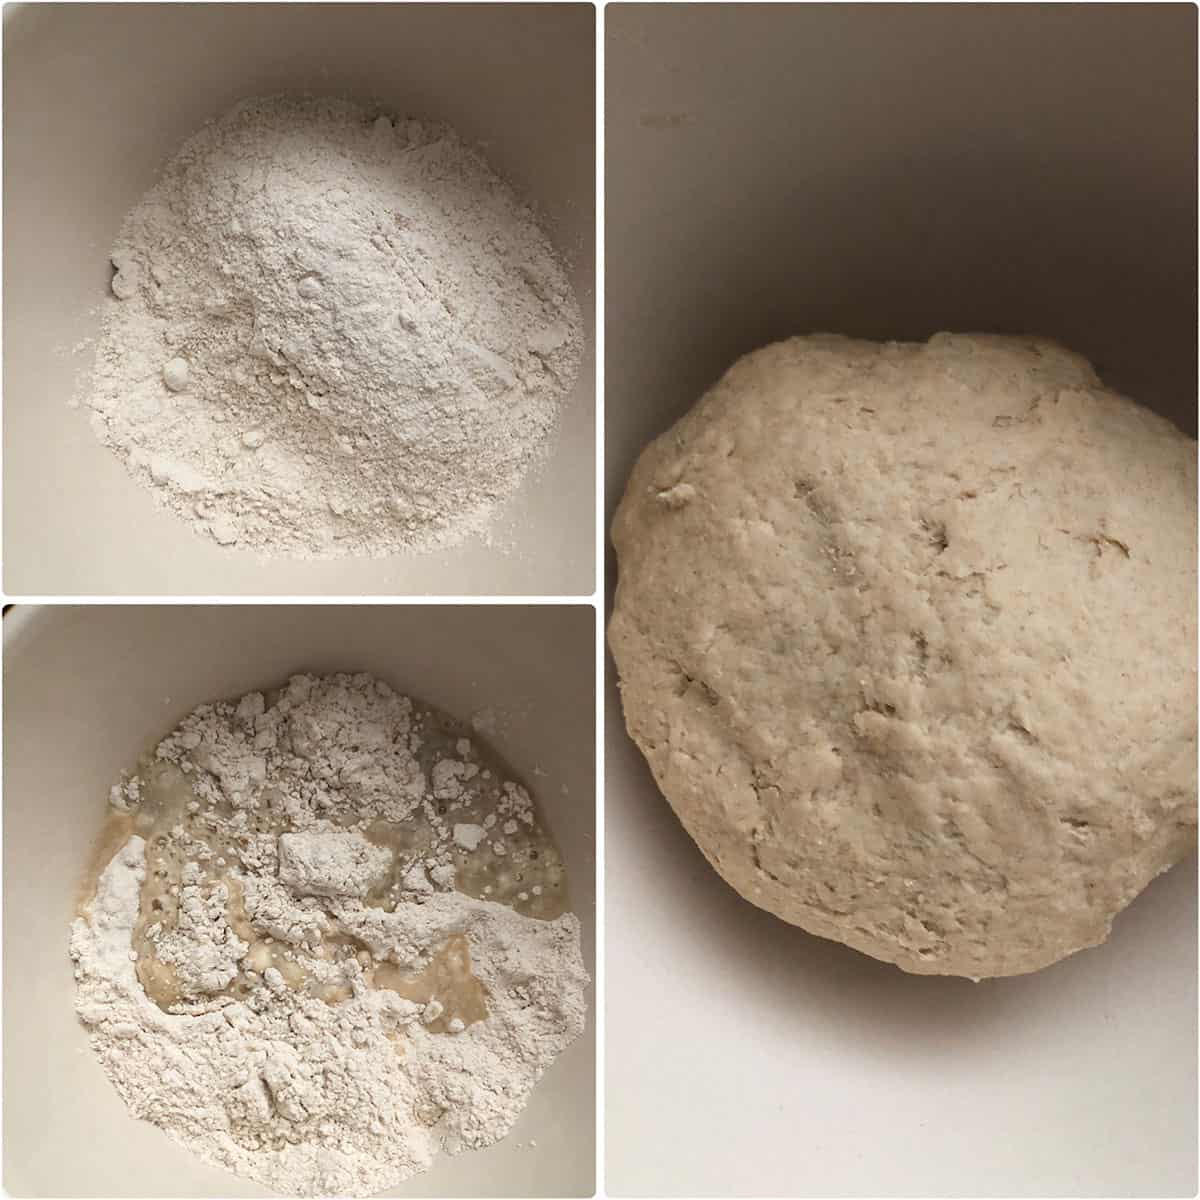 Whole wheat flour mixed with oil, salt, water and formed into a smooth dough